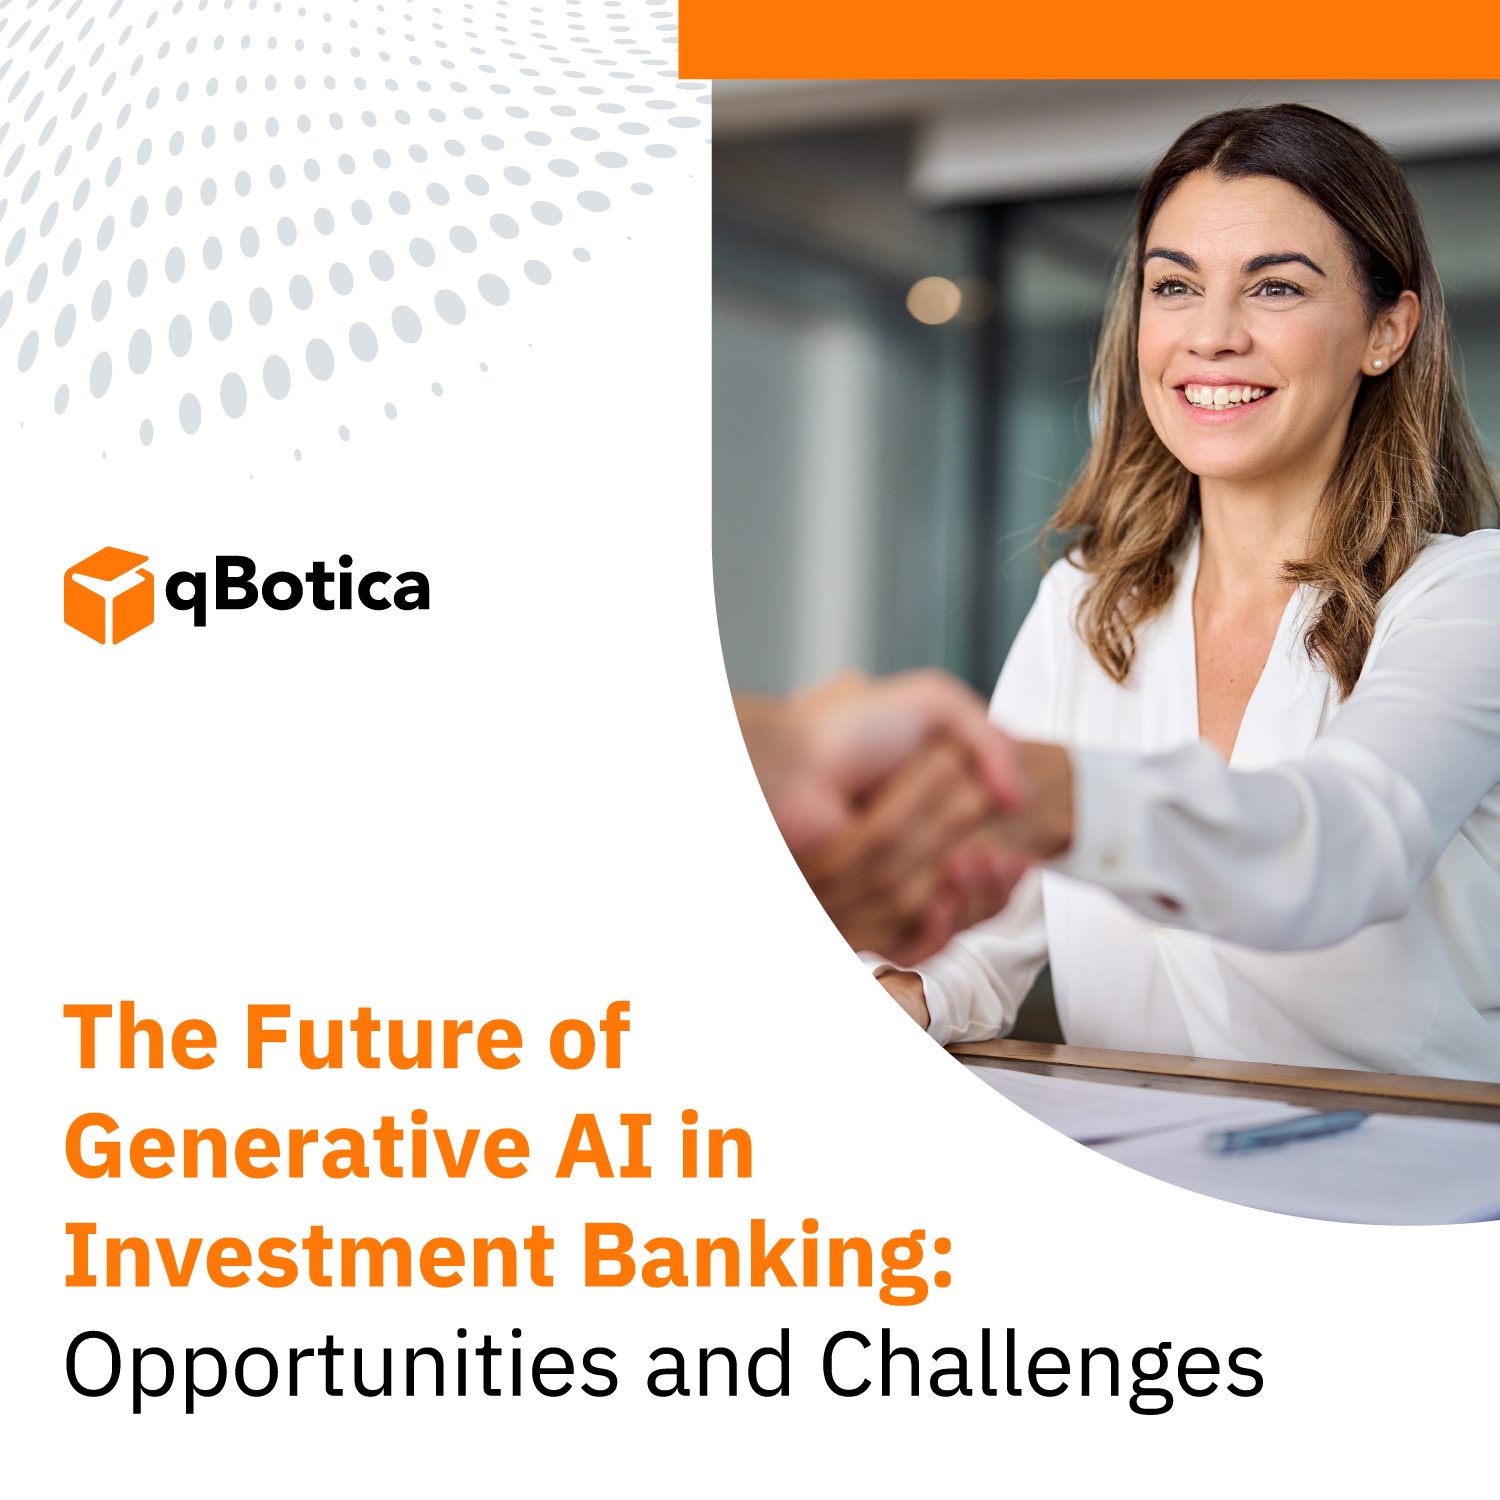 The Future of Generative AI in Investment Banking: Opportunities and Challenges